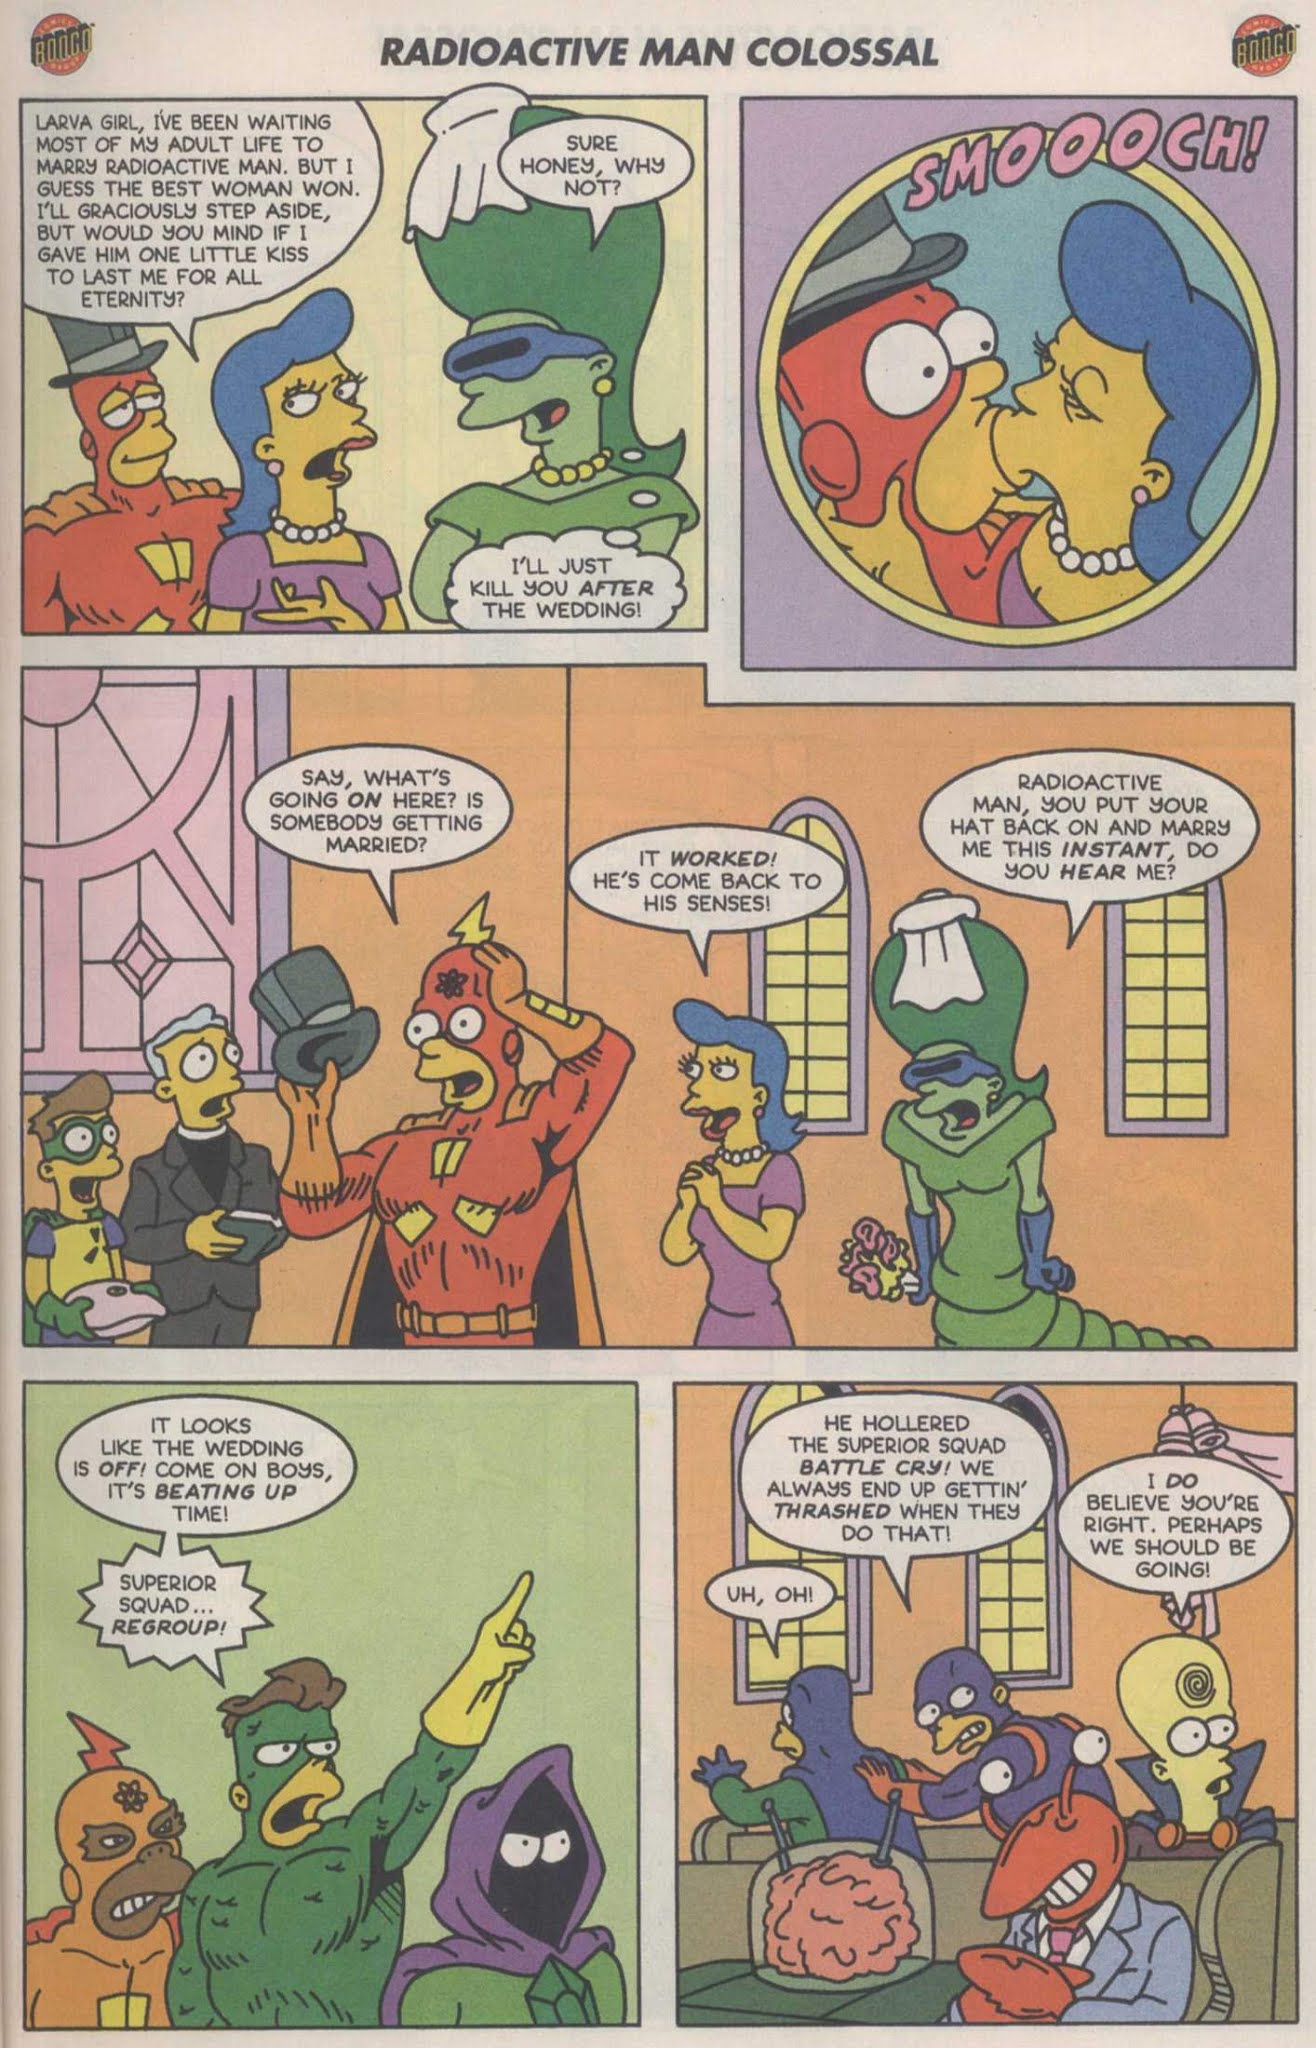 Read online Radioactive Man 80 pg. Colossal comic -  Issue # Full - 13